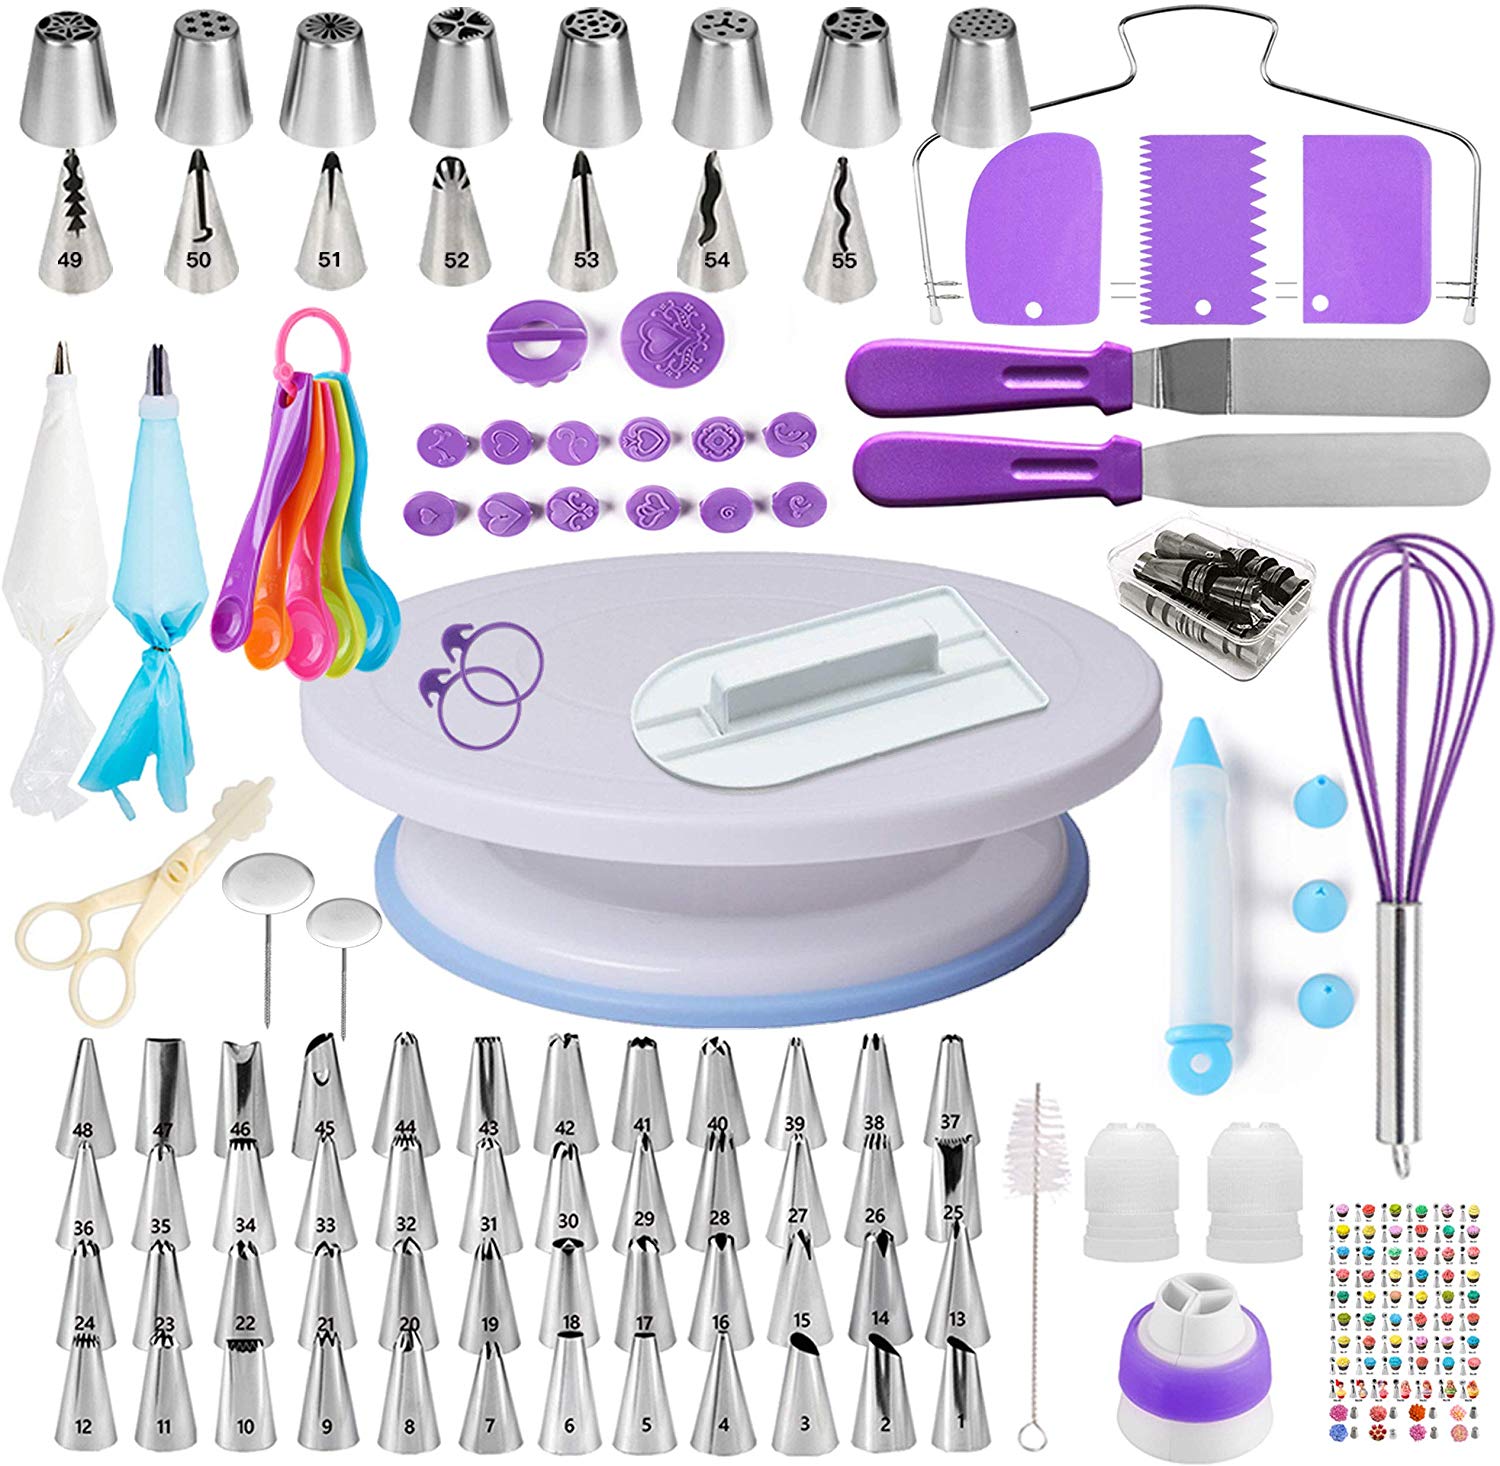 Cake Decorating Supplies Kit for Beginners, Set of 137, Baking Pastry Tools $23.99 (REG $59.99)